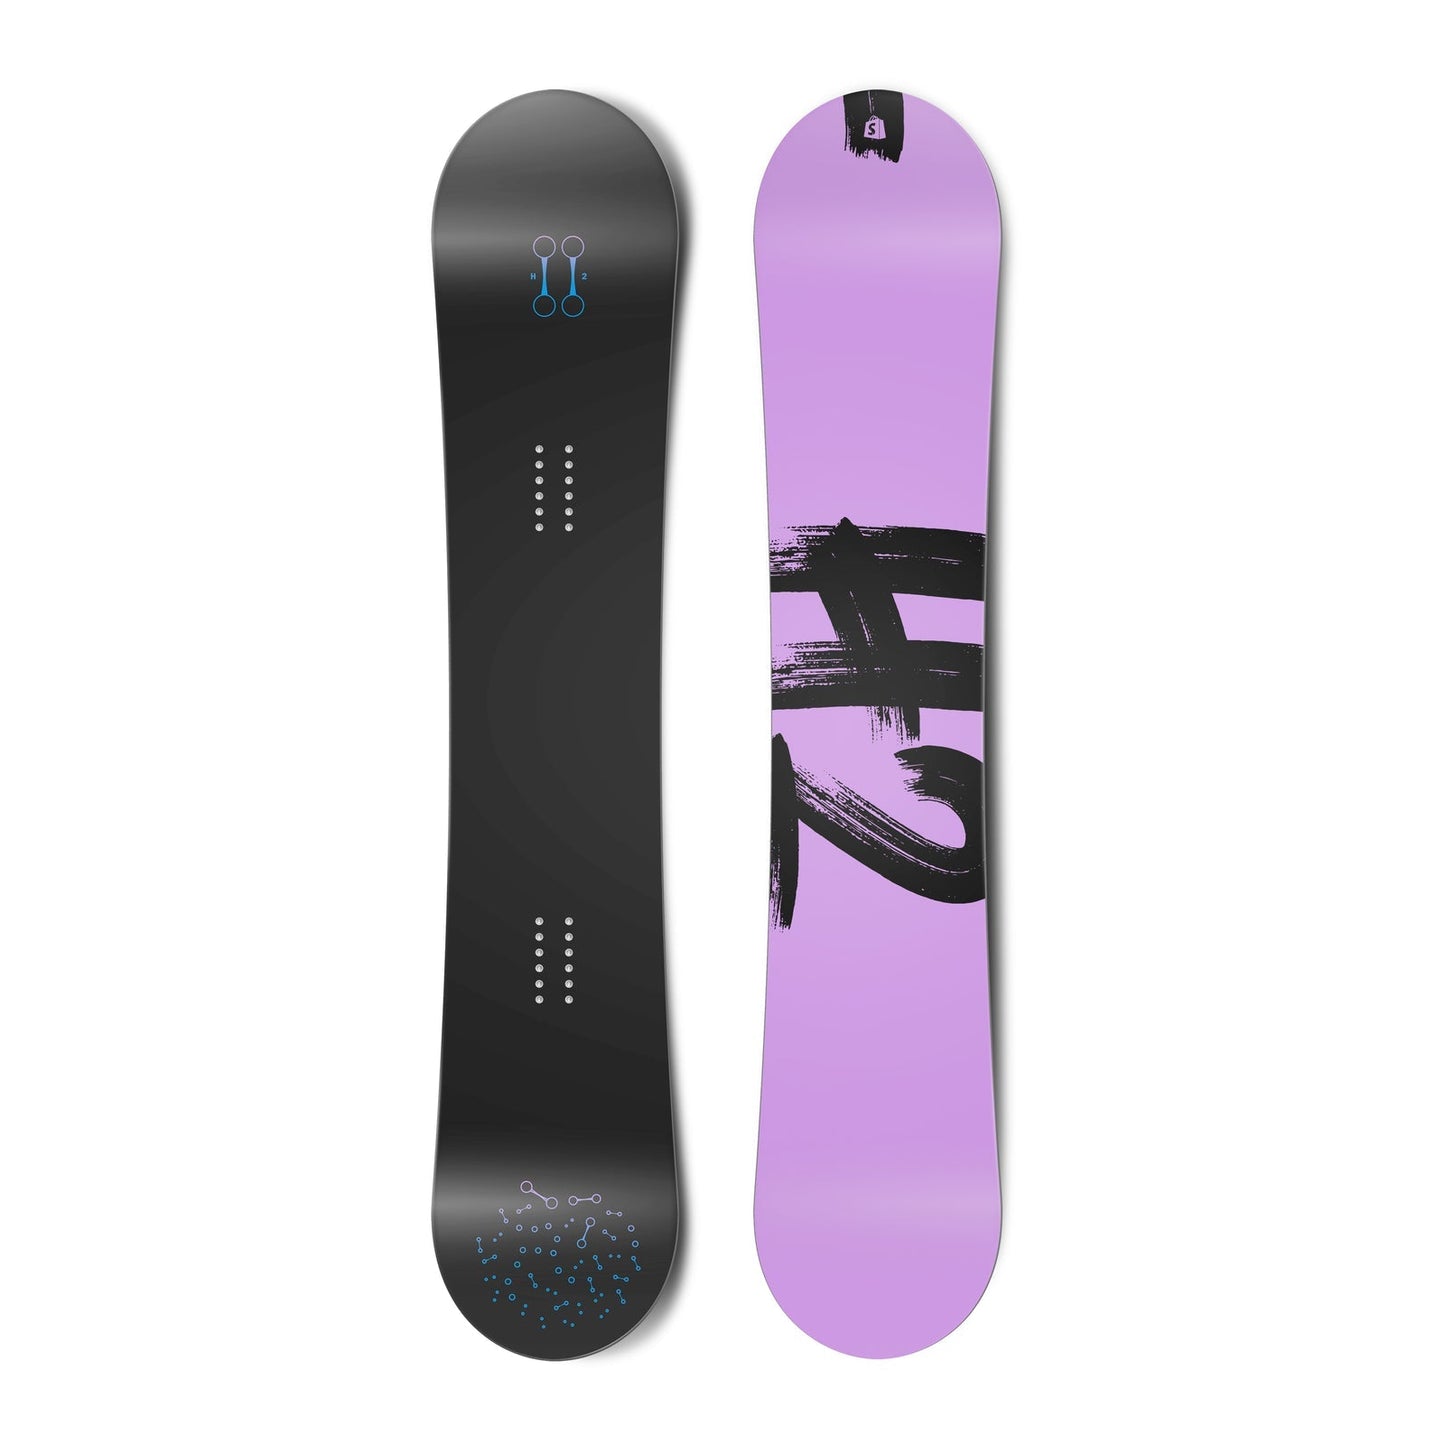 Top and bottom view of a snowboard. The top view shows stylized hydrogen bonds and the bottom view
        shows “H2” in a brush script typeface.